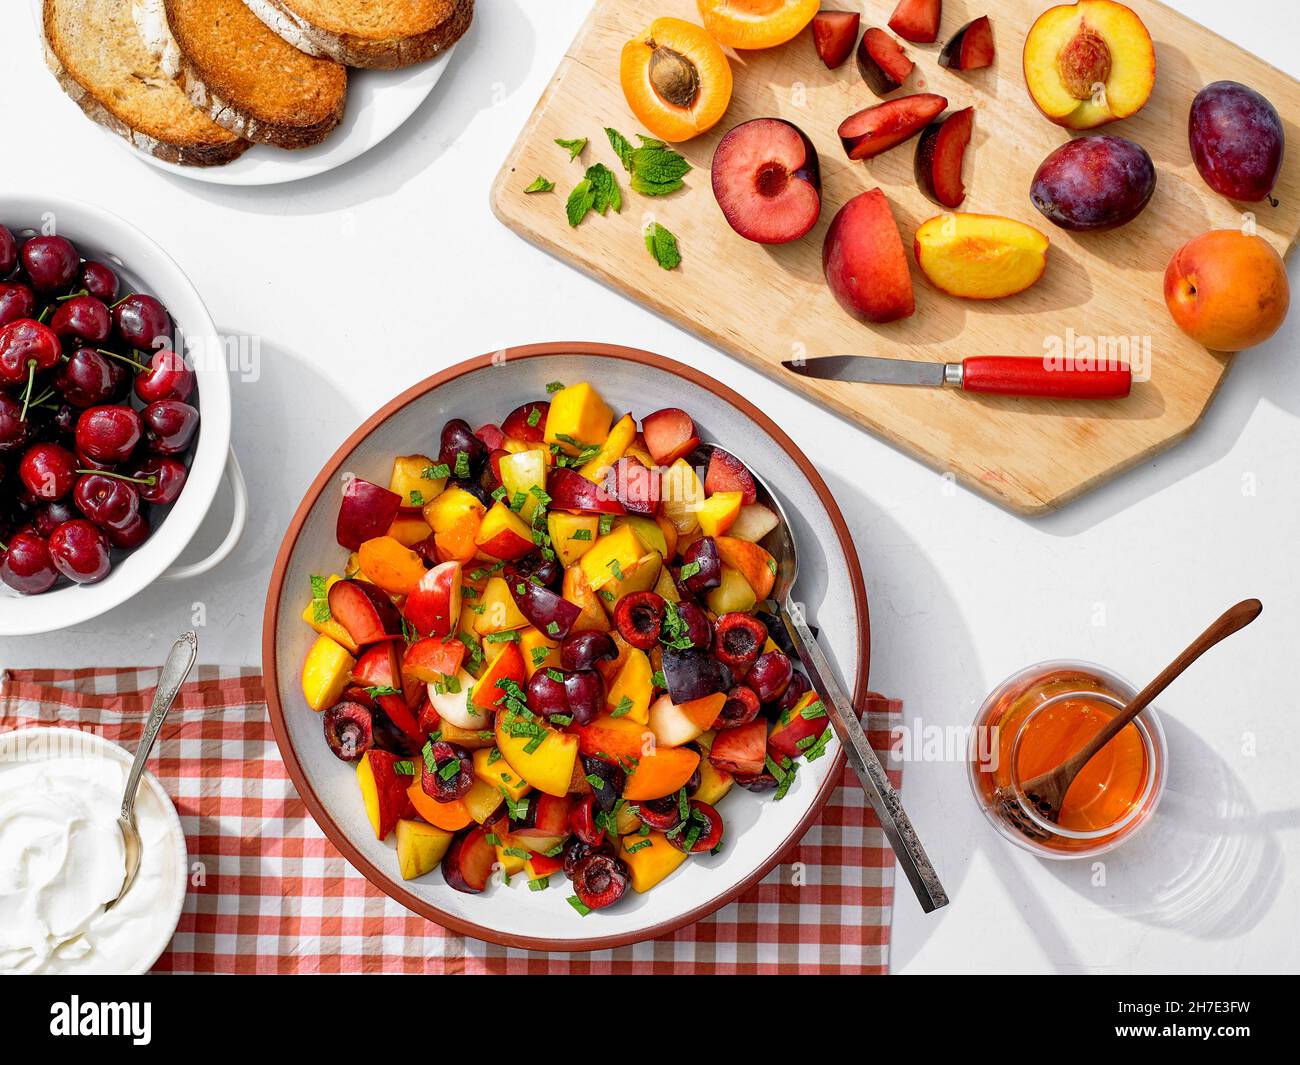 Minty Fruit Salad of Peaches, Cherries, Plums, Nectarines, Apricots and Mangoes Stock Photo